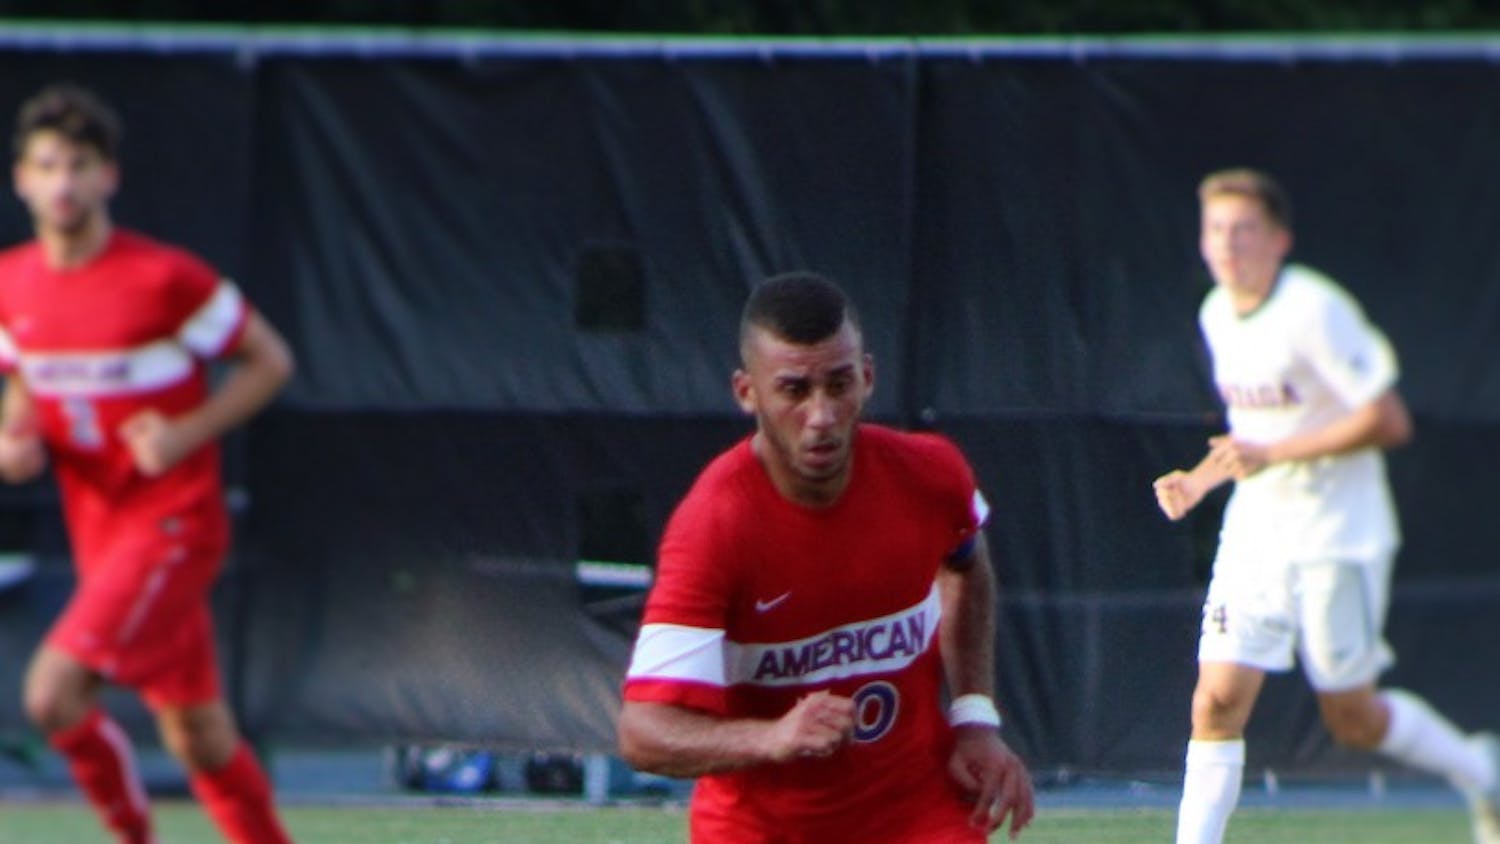 Patriot League Offensive Player of the Year Panos Nakhid and the AU men's soccer team hosts the Patriot League Tournament in search of its fifth title